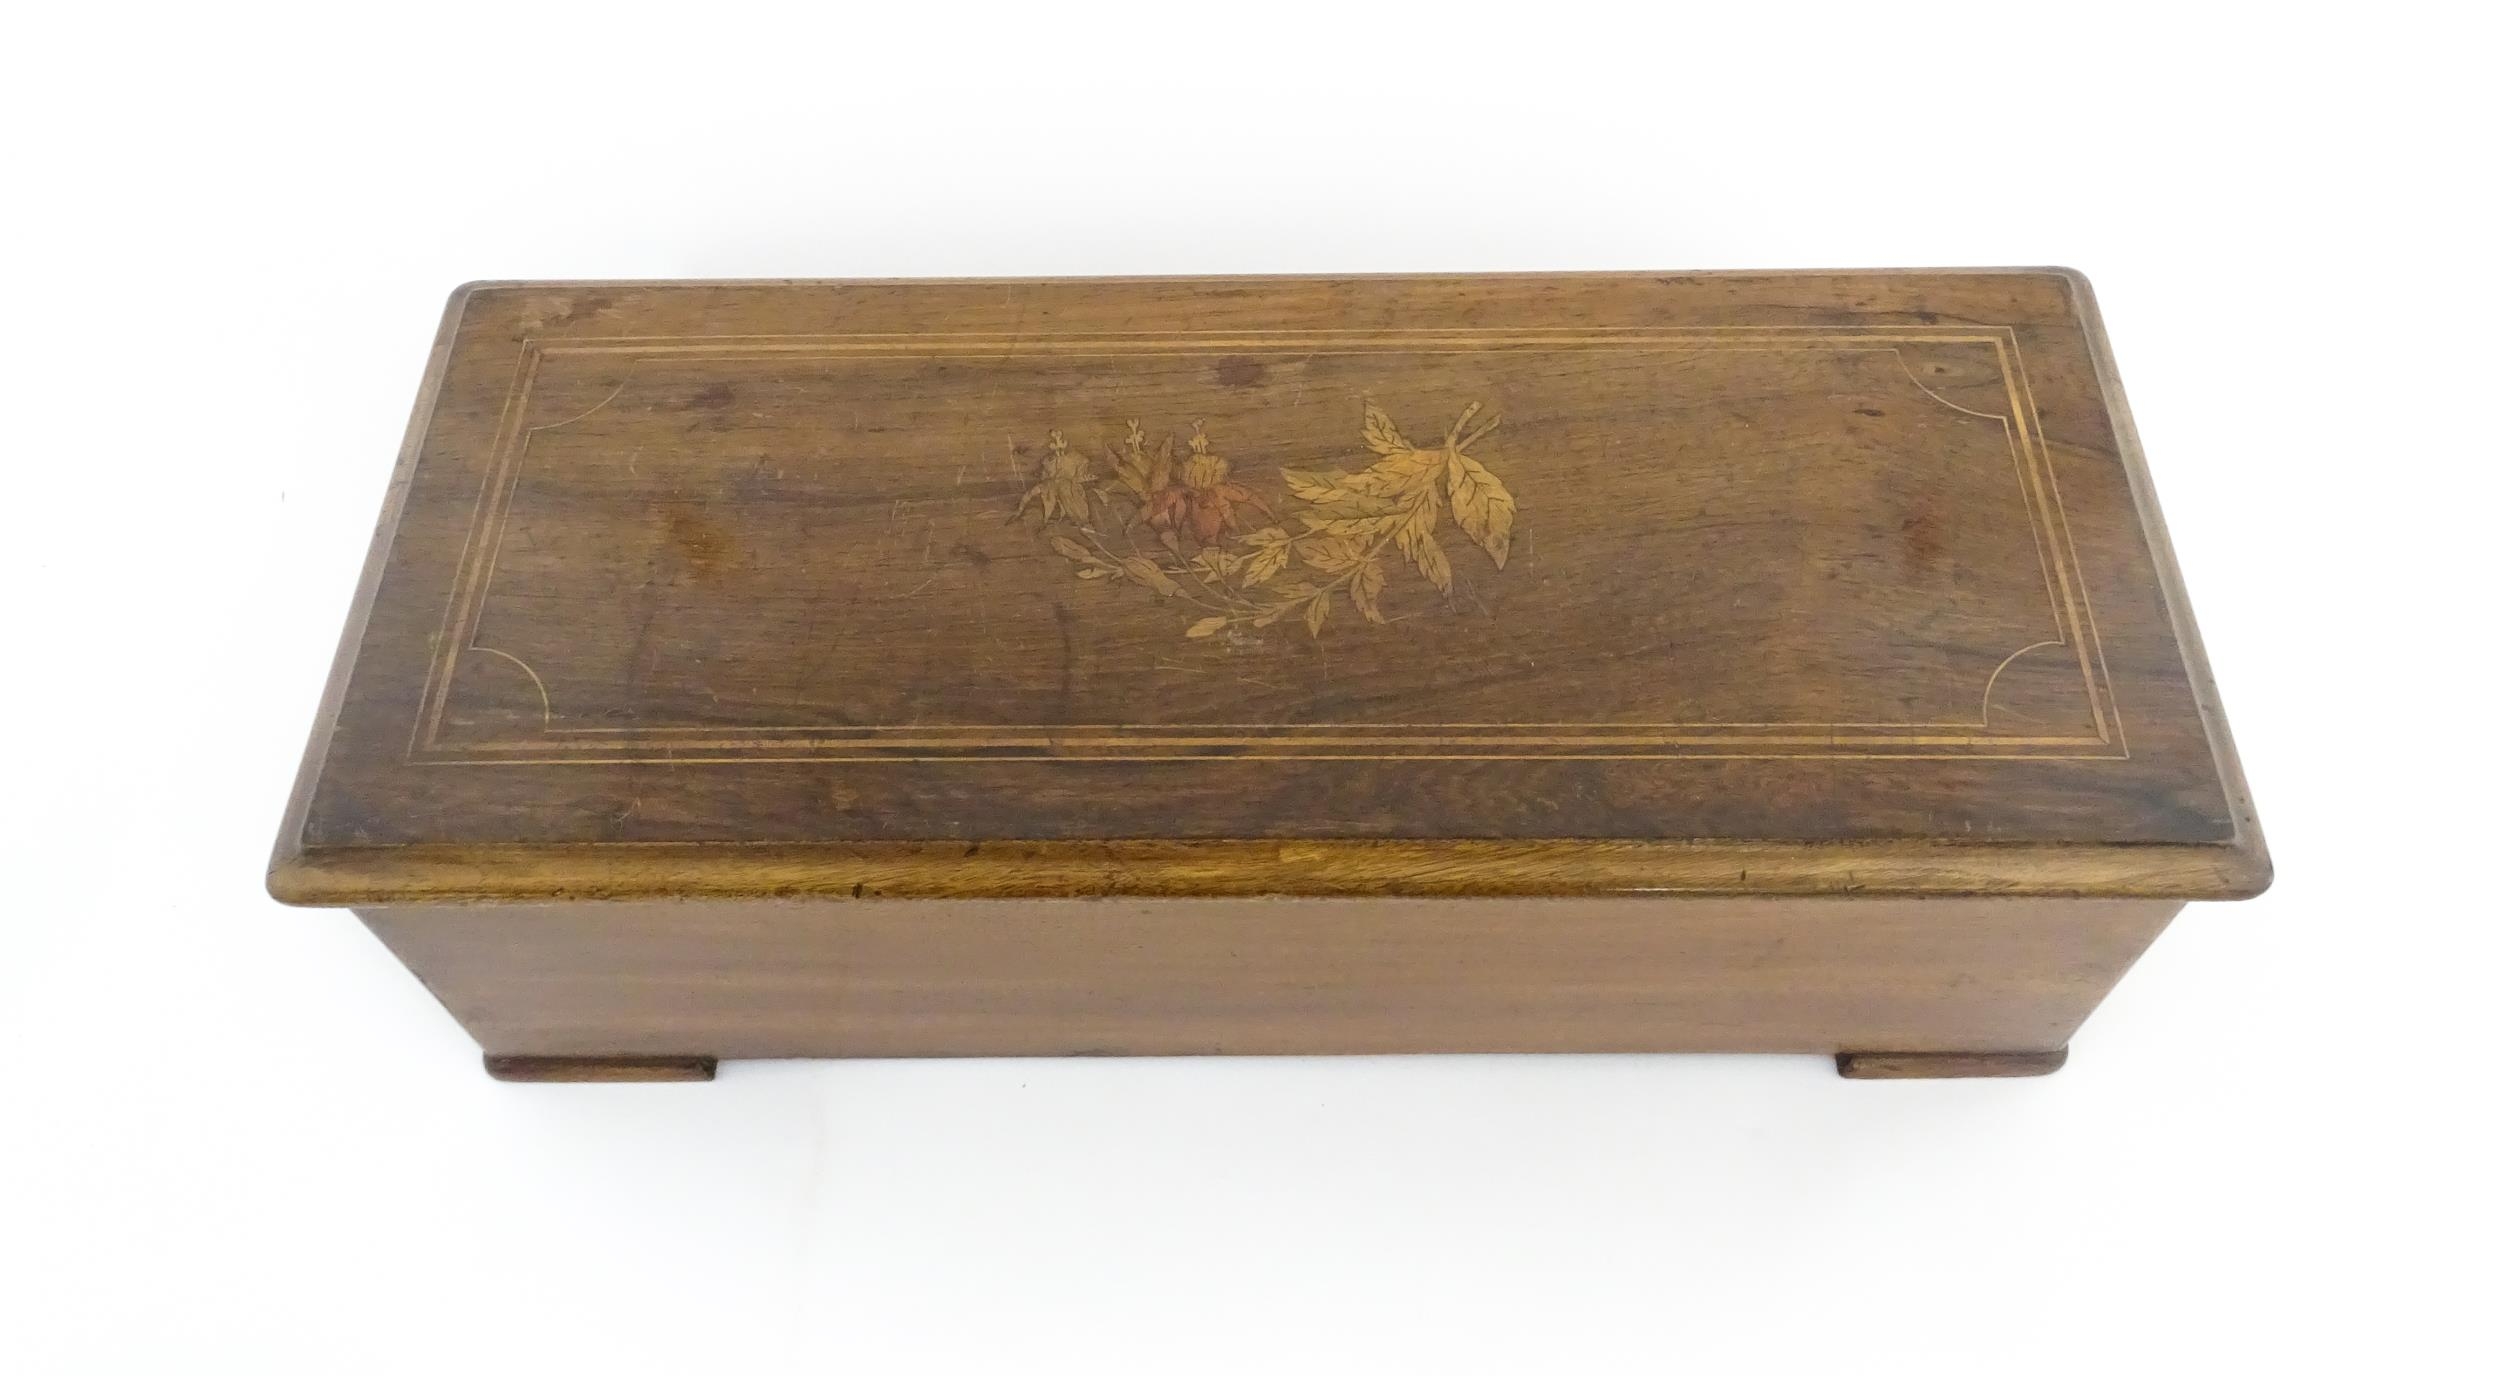 A 19thC Swiss rosewood music box with marquetry inlaid decoration to lid, playing 10 airs, by PVF of - Image 9 of 13